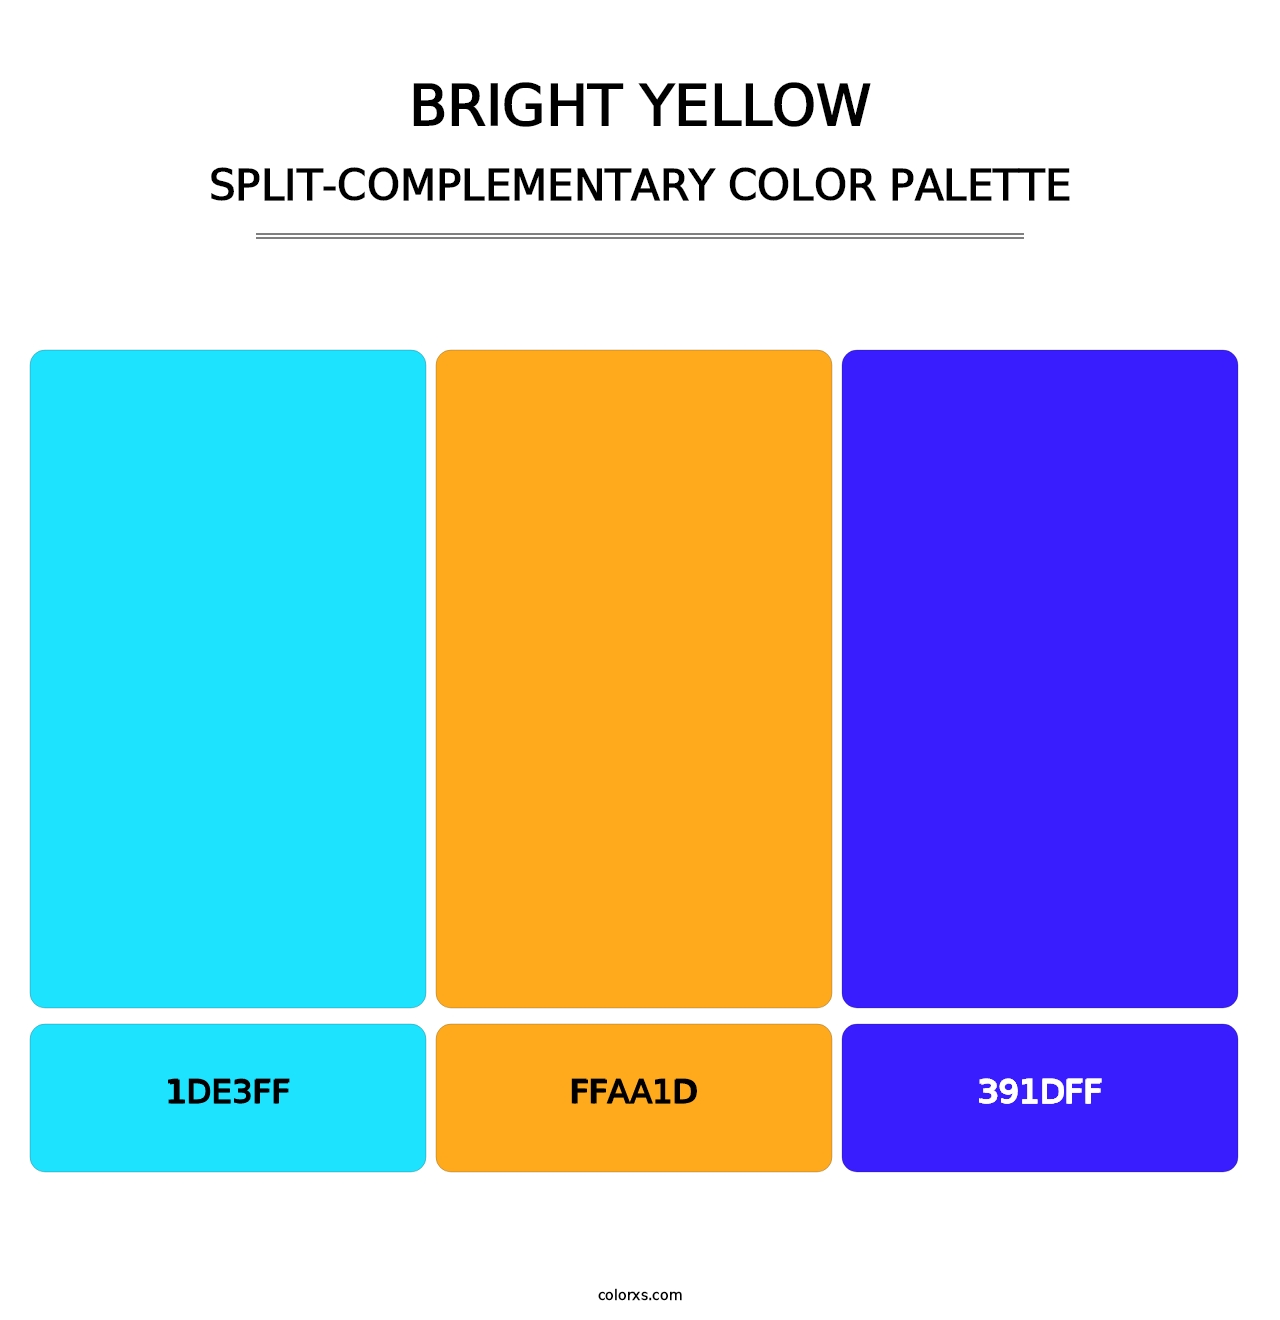 Bright Yellow - Split-Complementary Color Palette